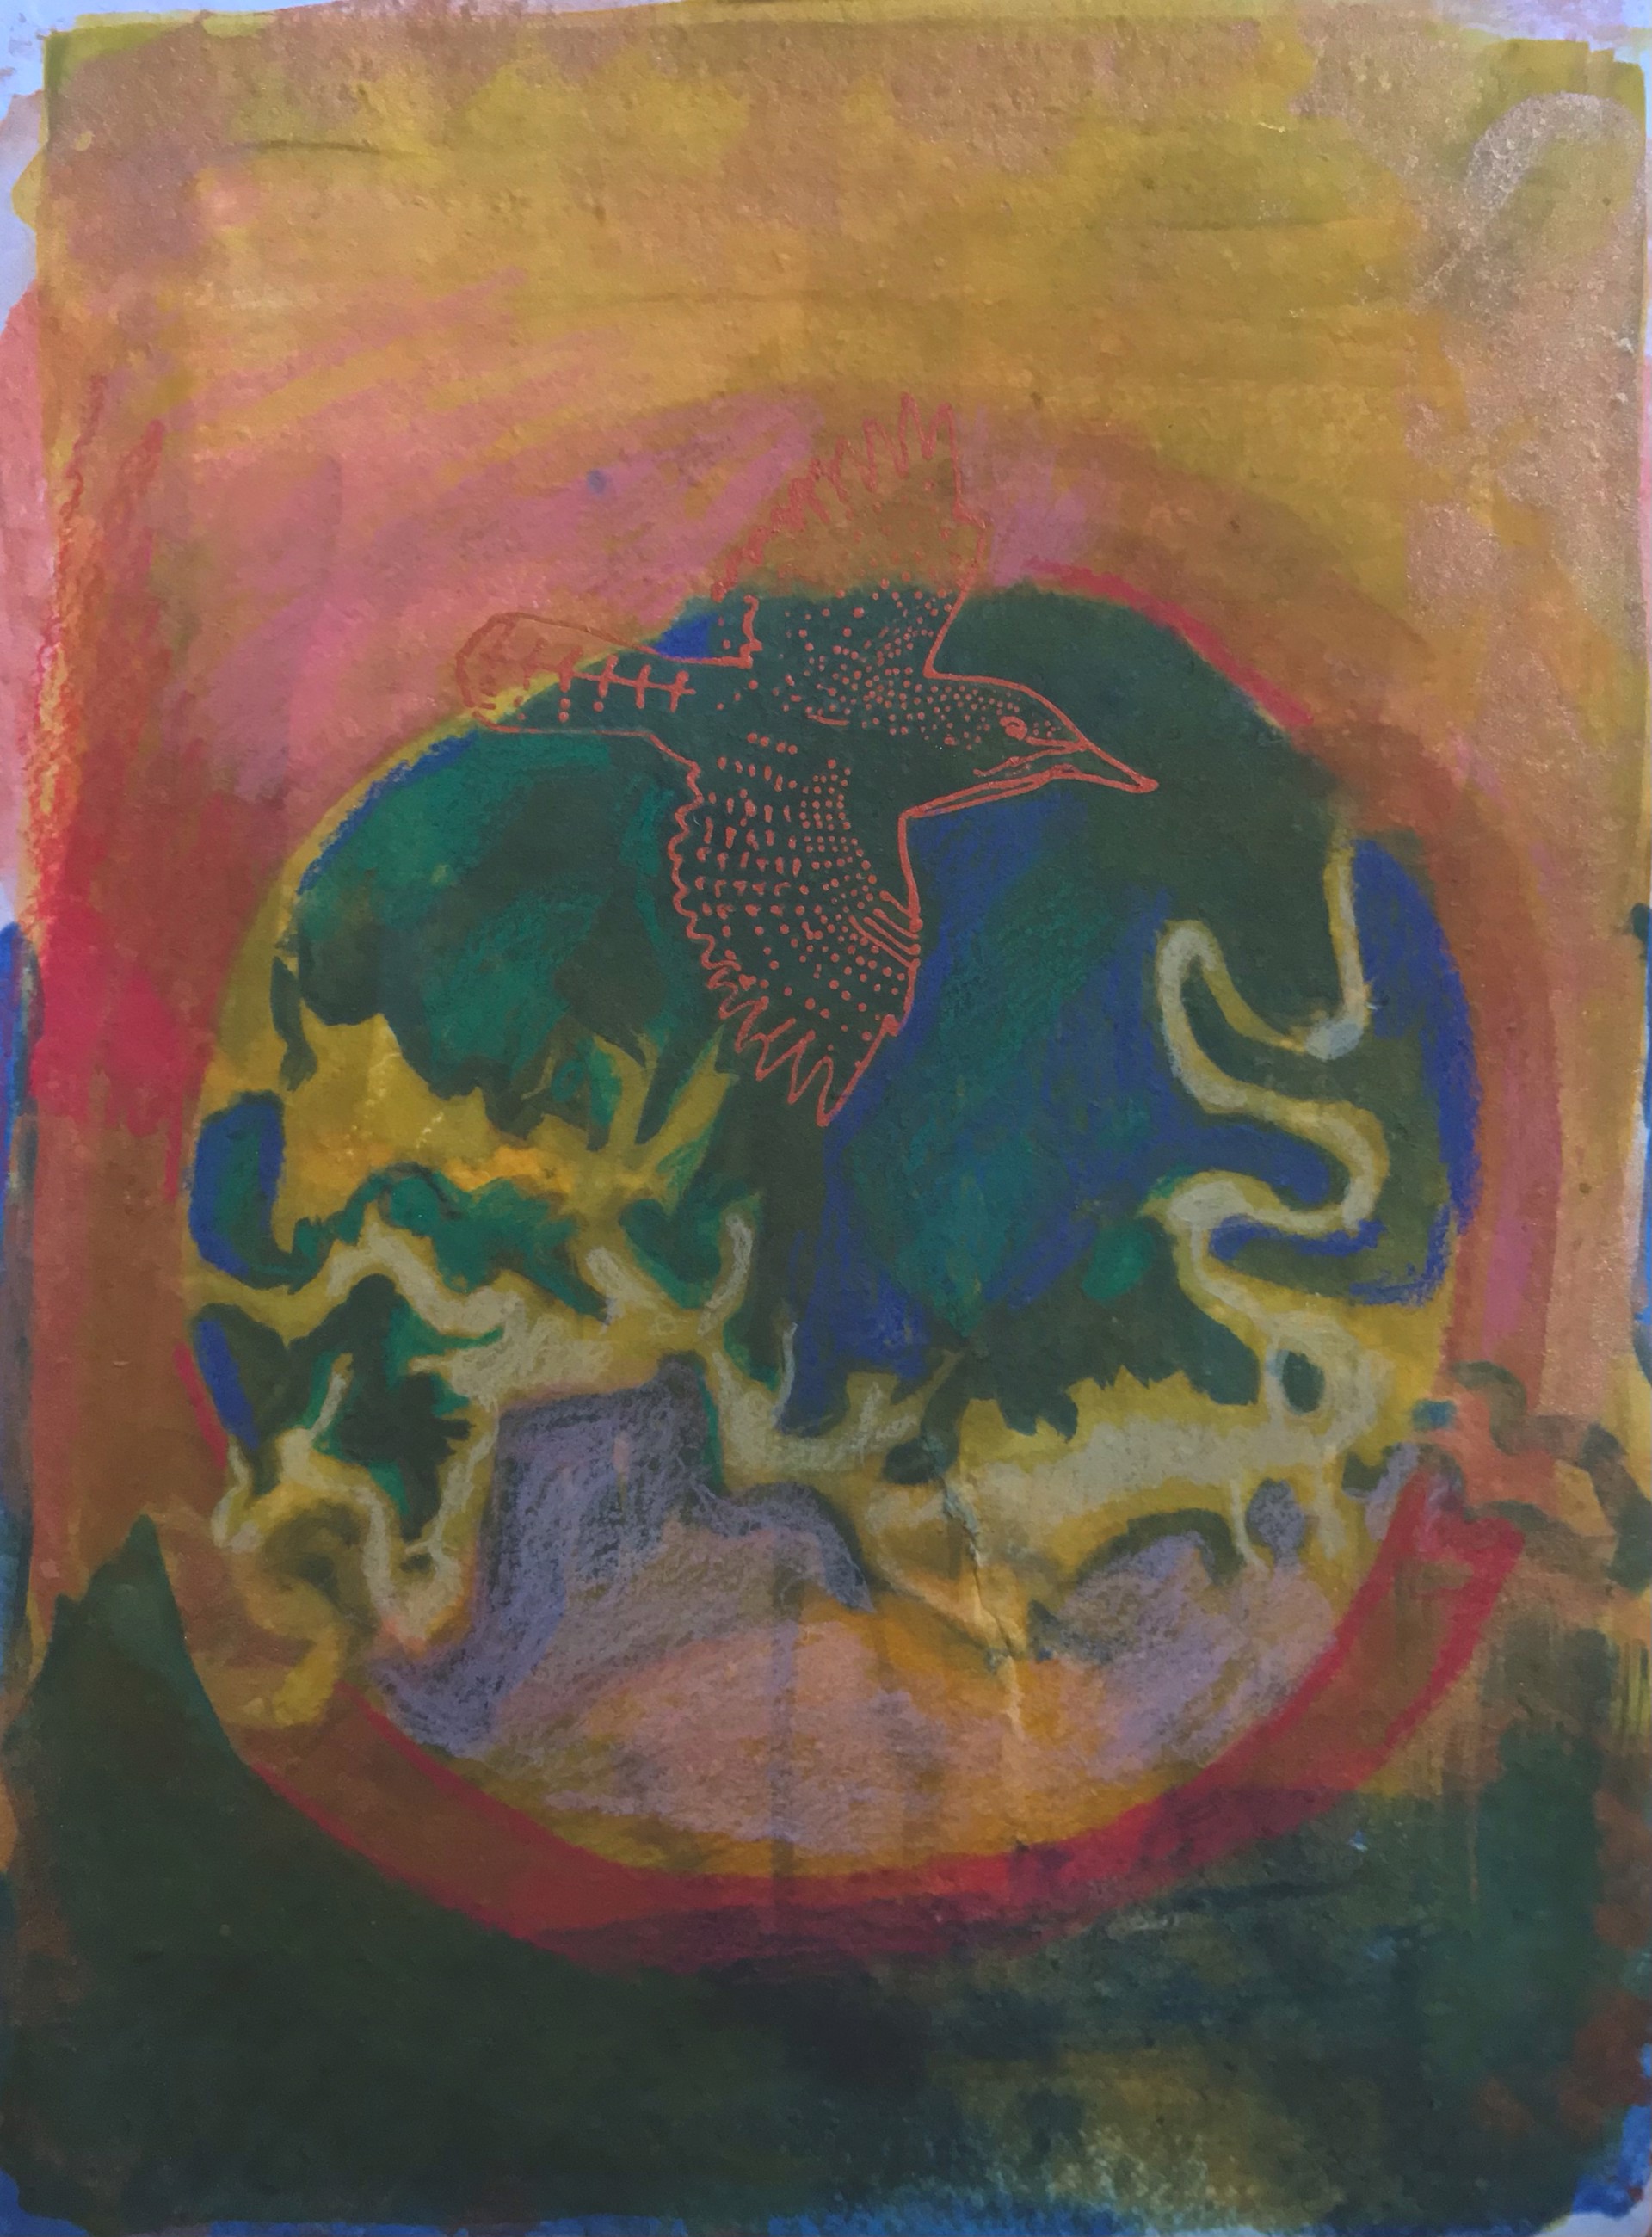 Untitled cyanotype 2 (multicolored lake aerial view with wren) by Jacqueline May